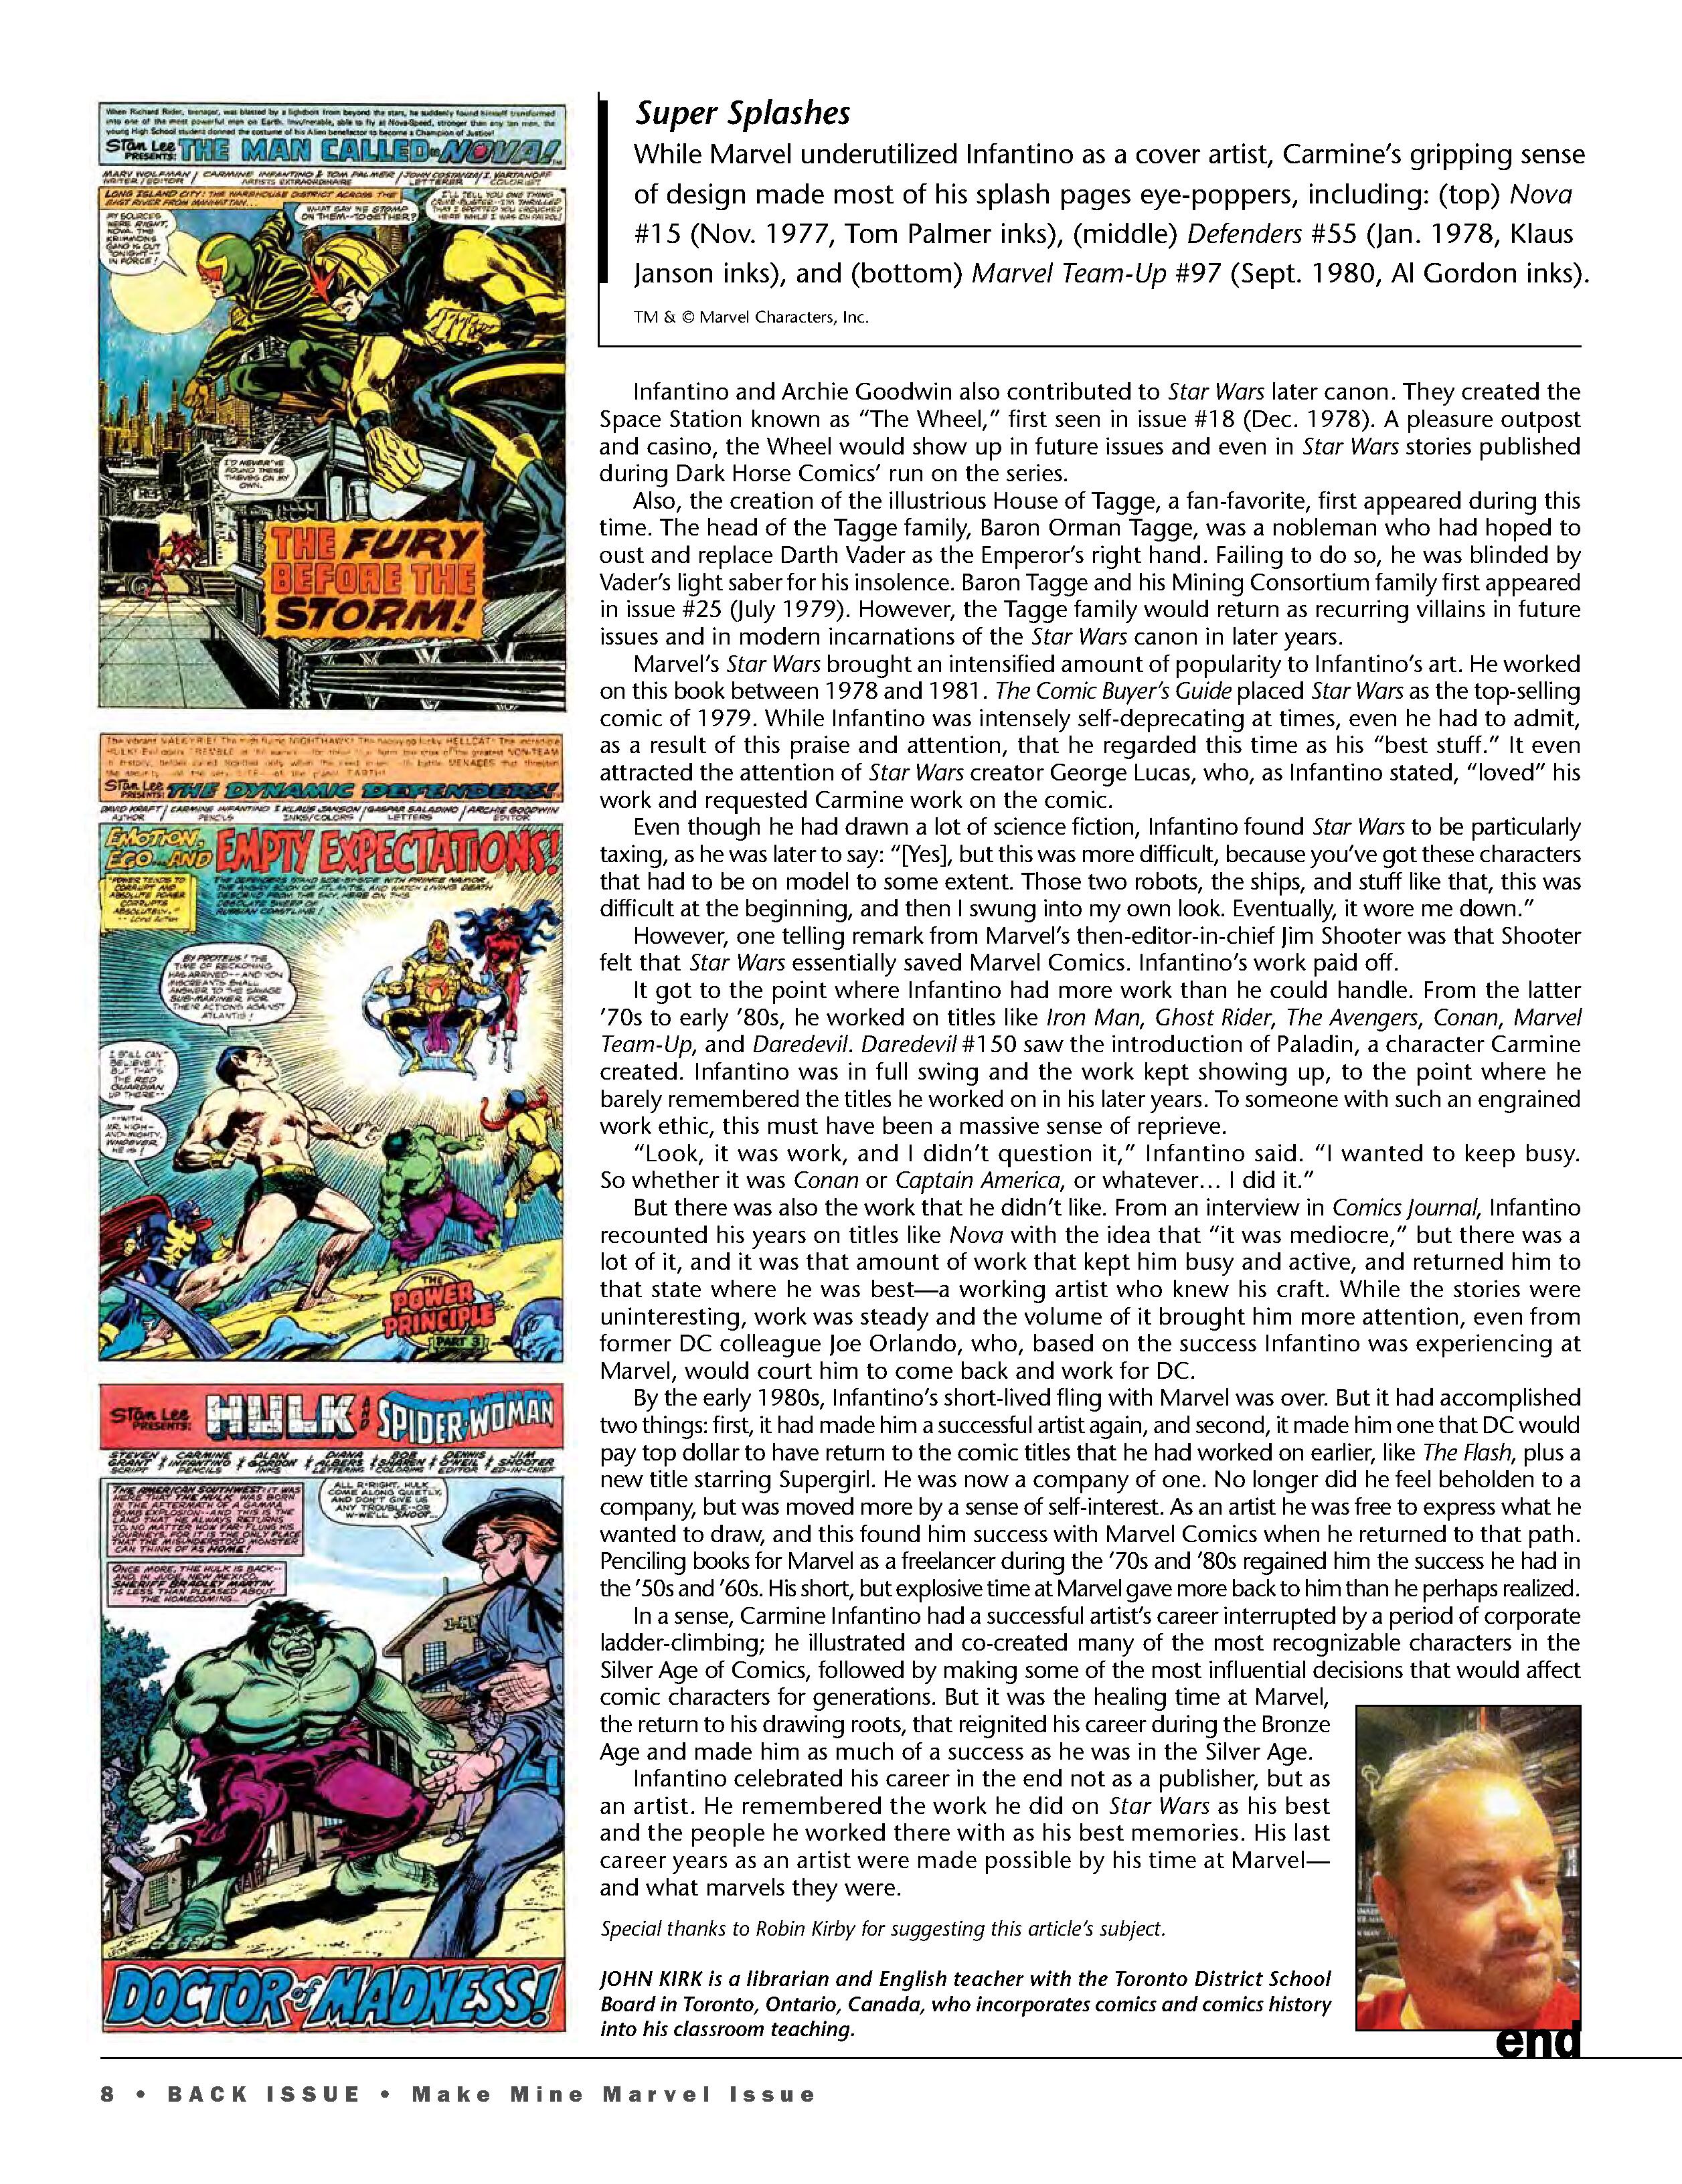 Read online Back Issue comic -  Issue #110 - 10